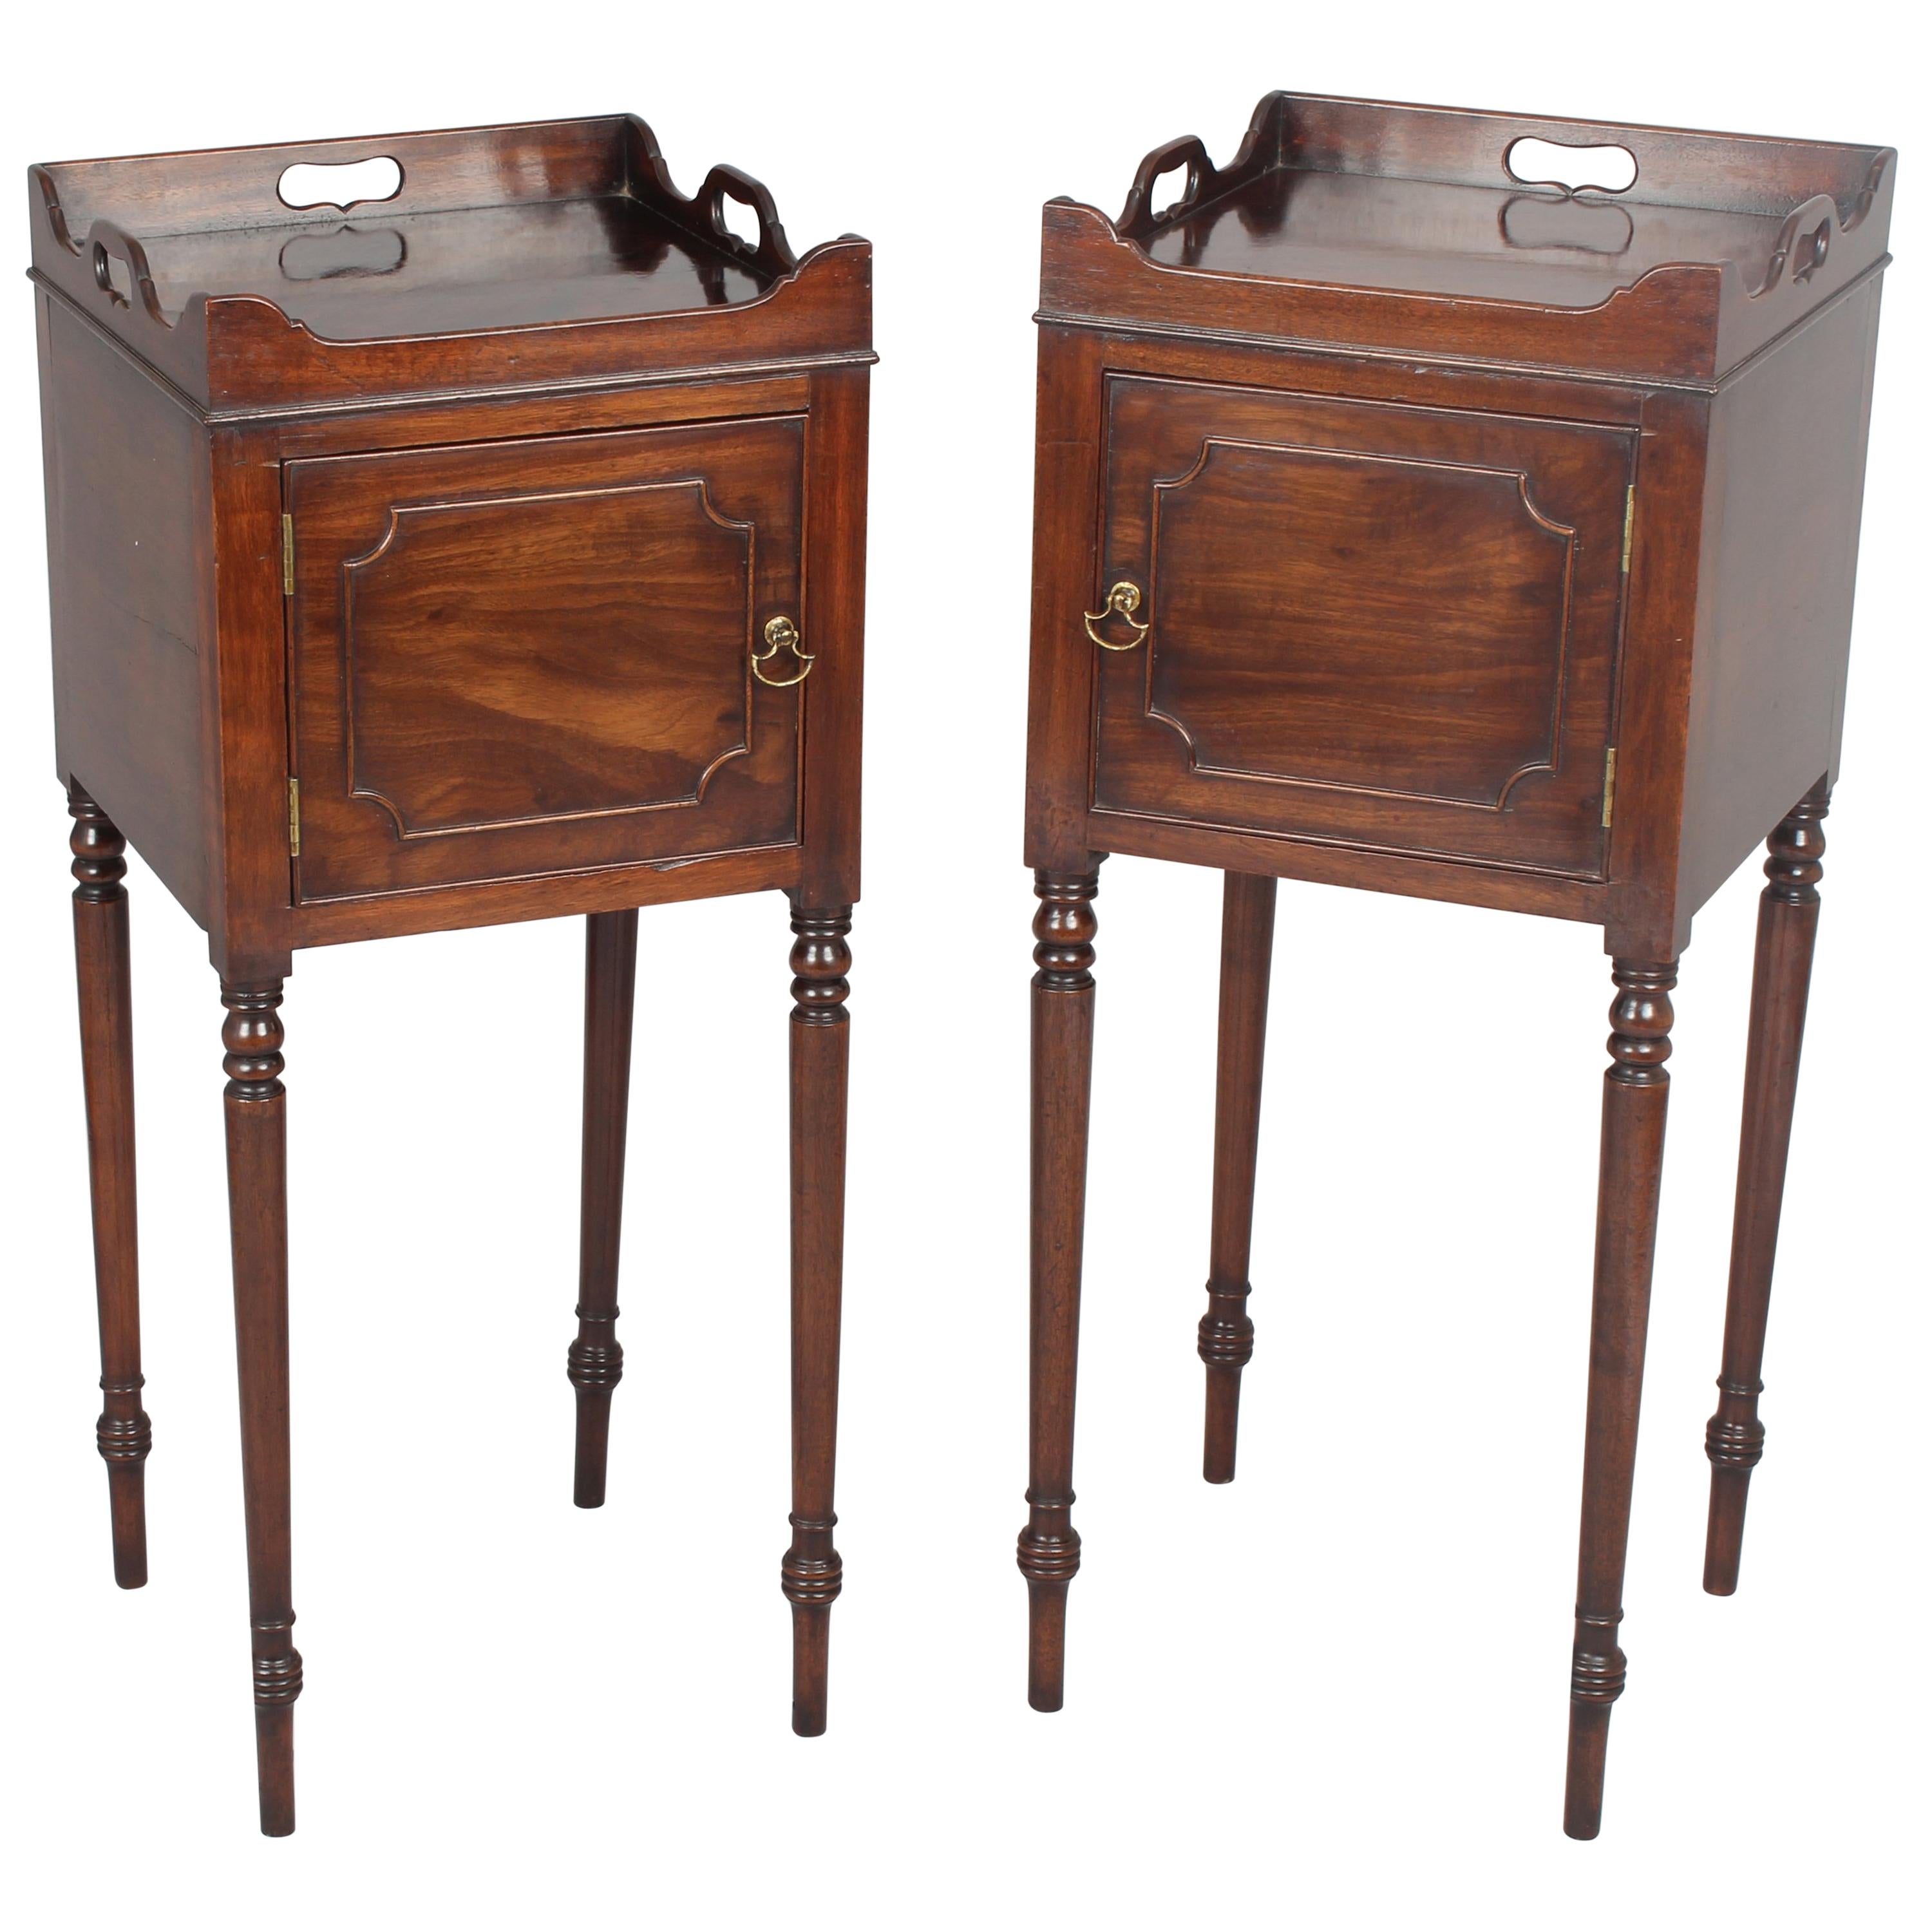 Very Rare Pair of George III Period Mahogany Bedside Pot-Cupboards For Sale